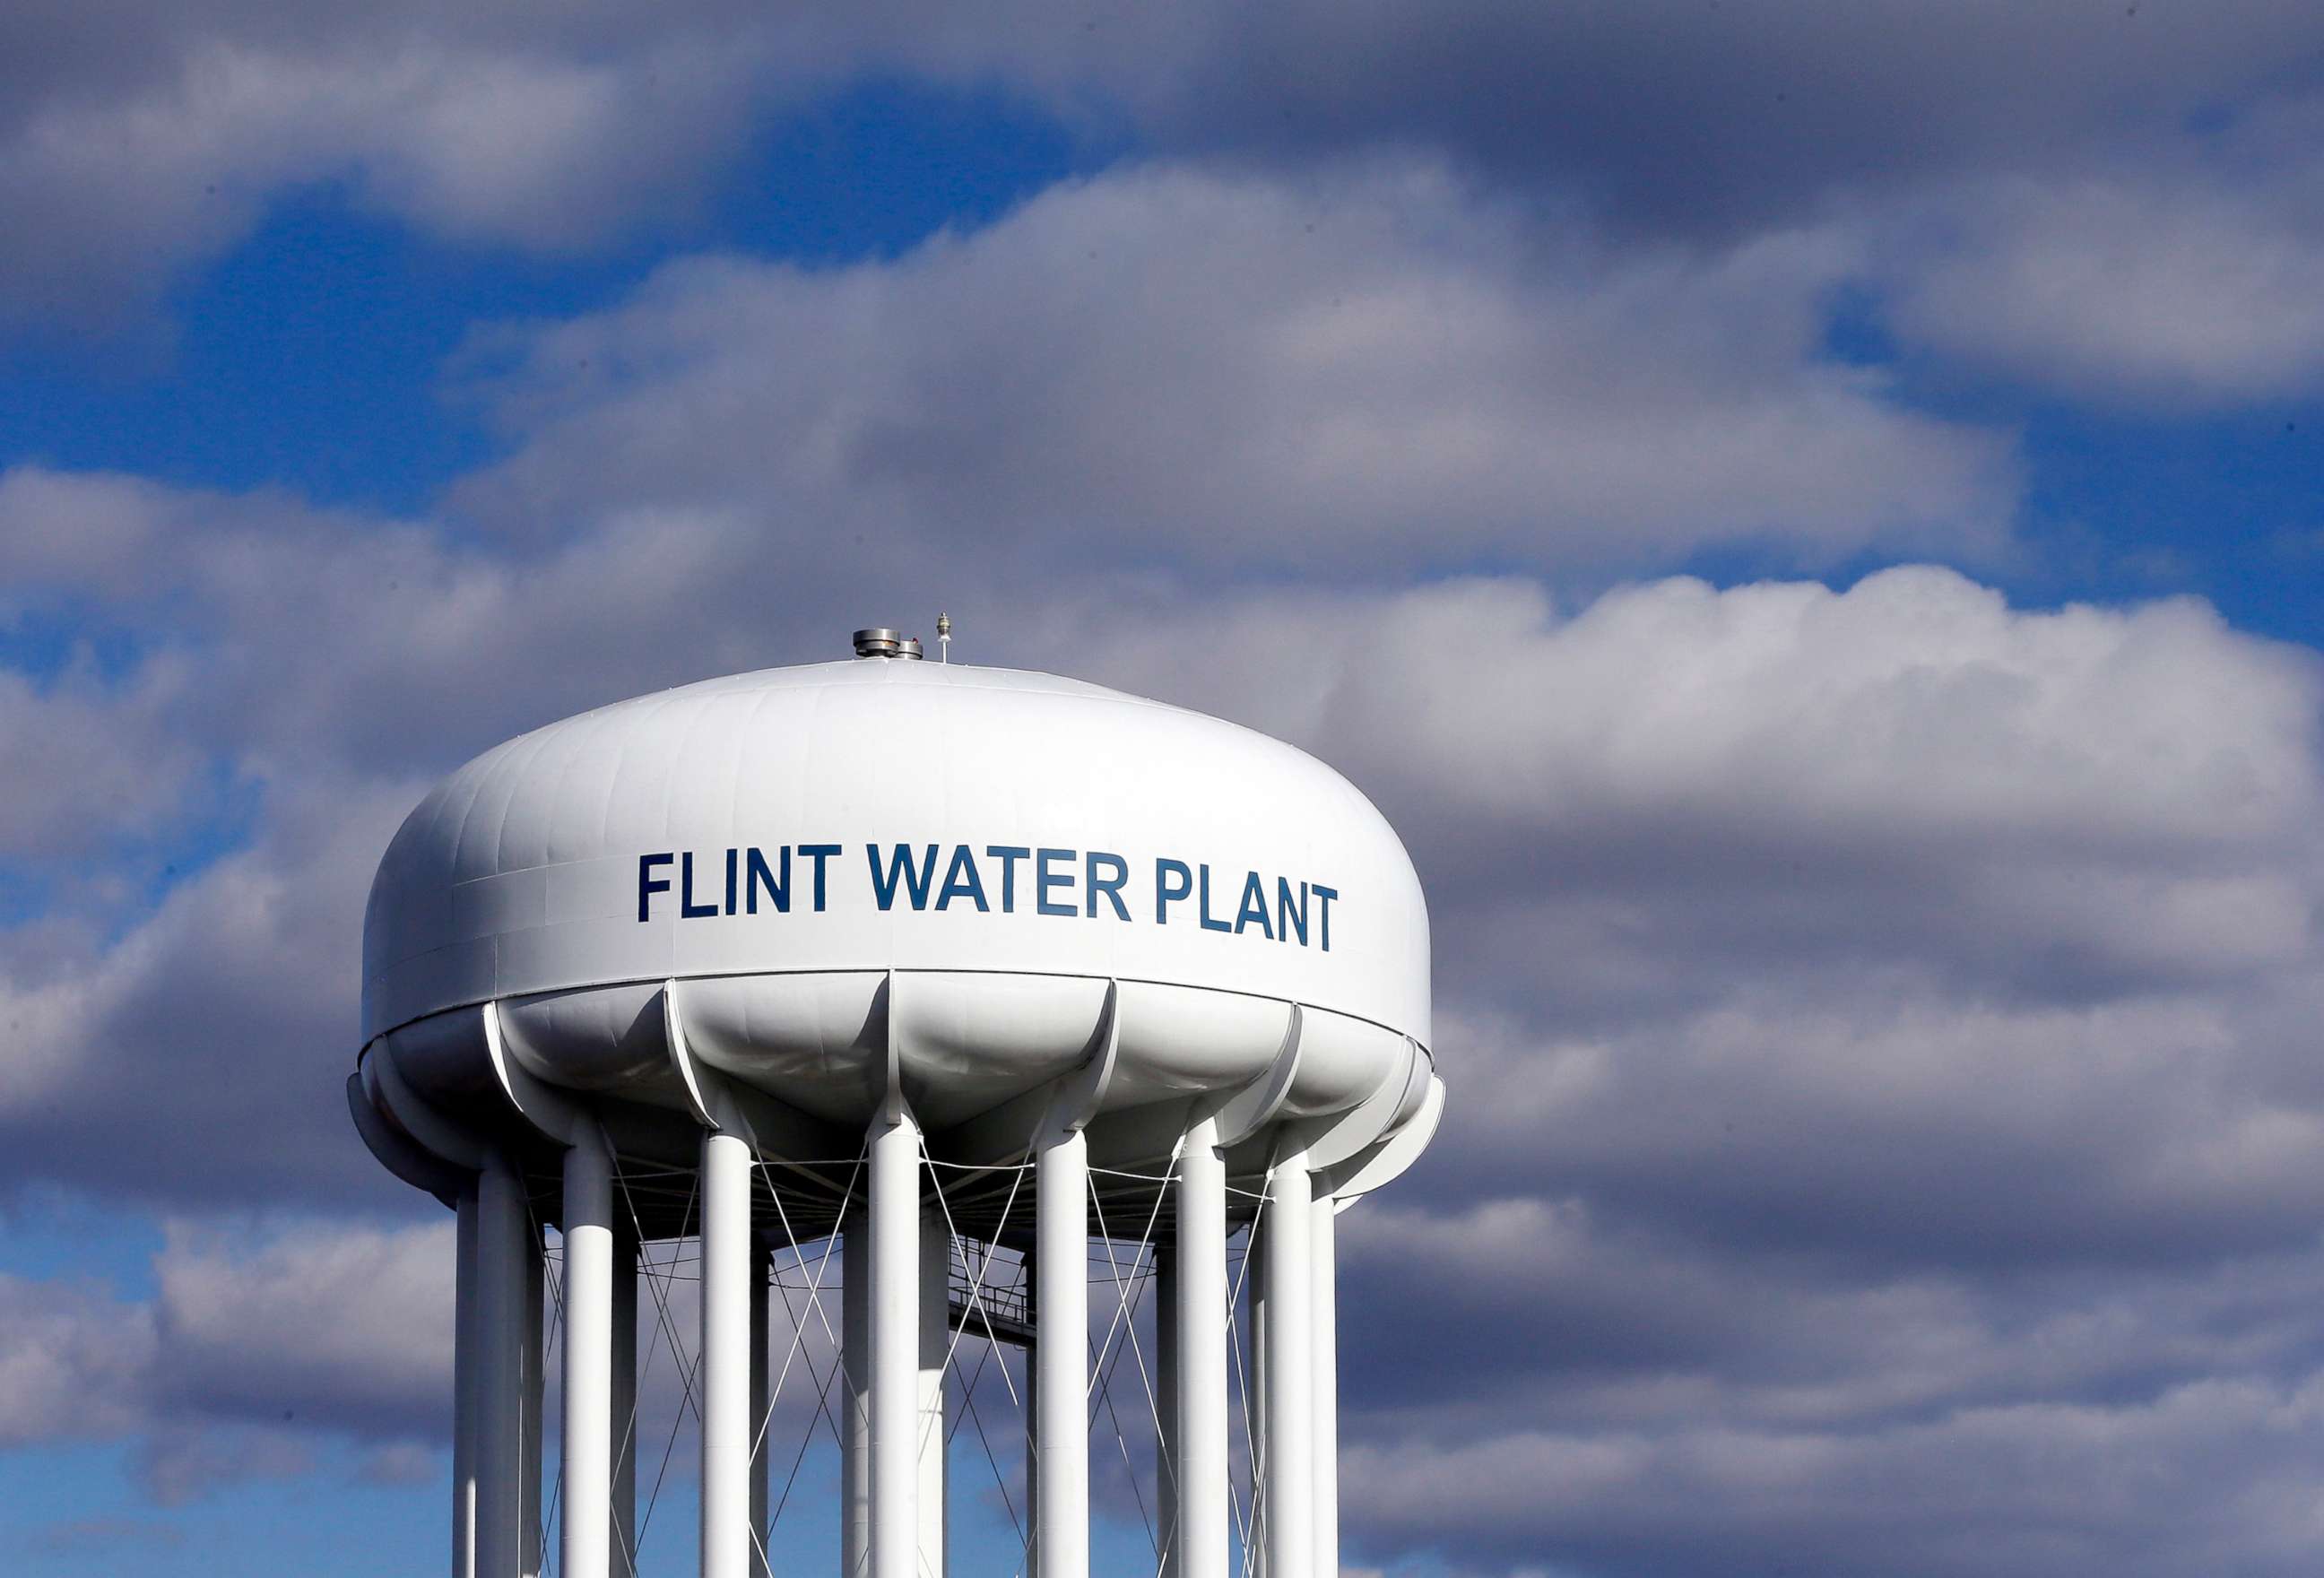 PHOTO: In this March 21, 2016, file photo, the Flint Water Plant water tower is seen in Flint, Mich.